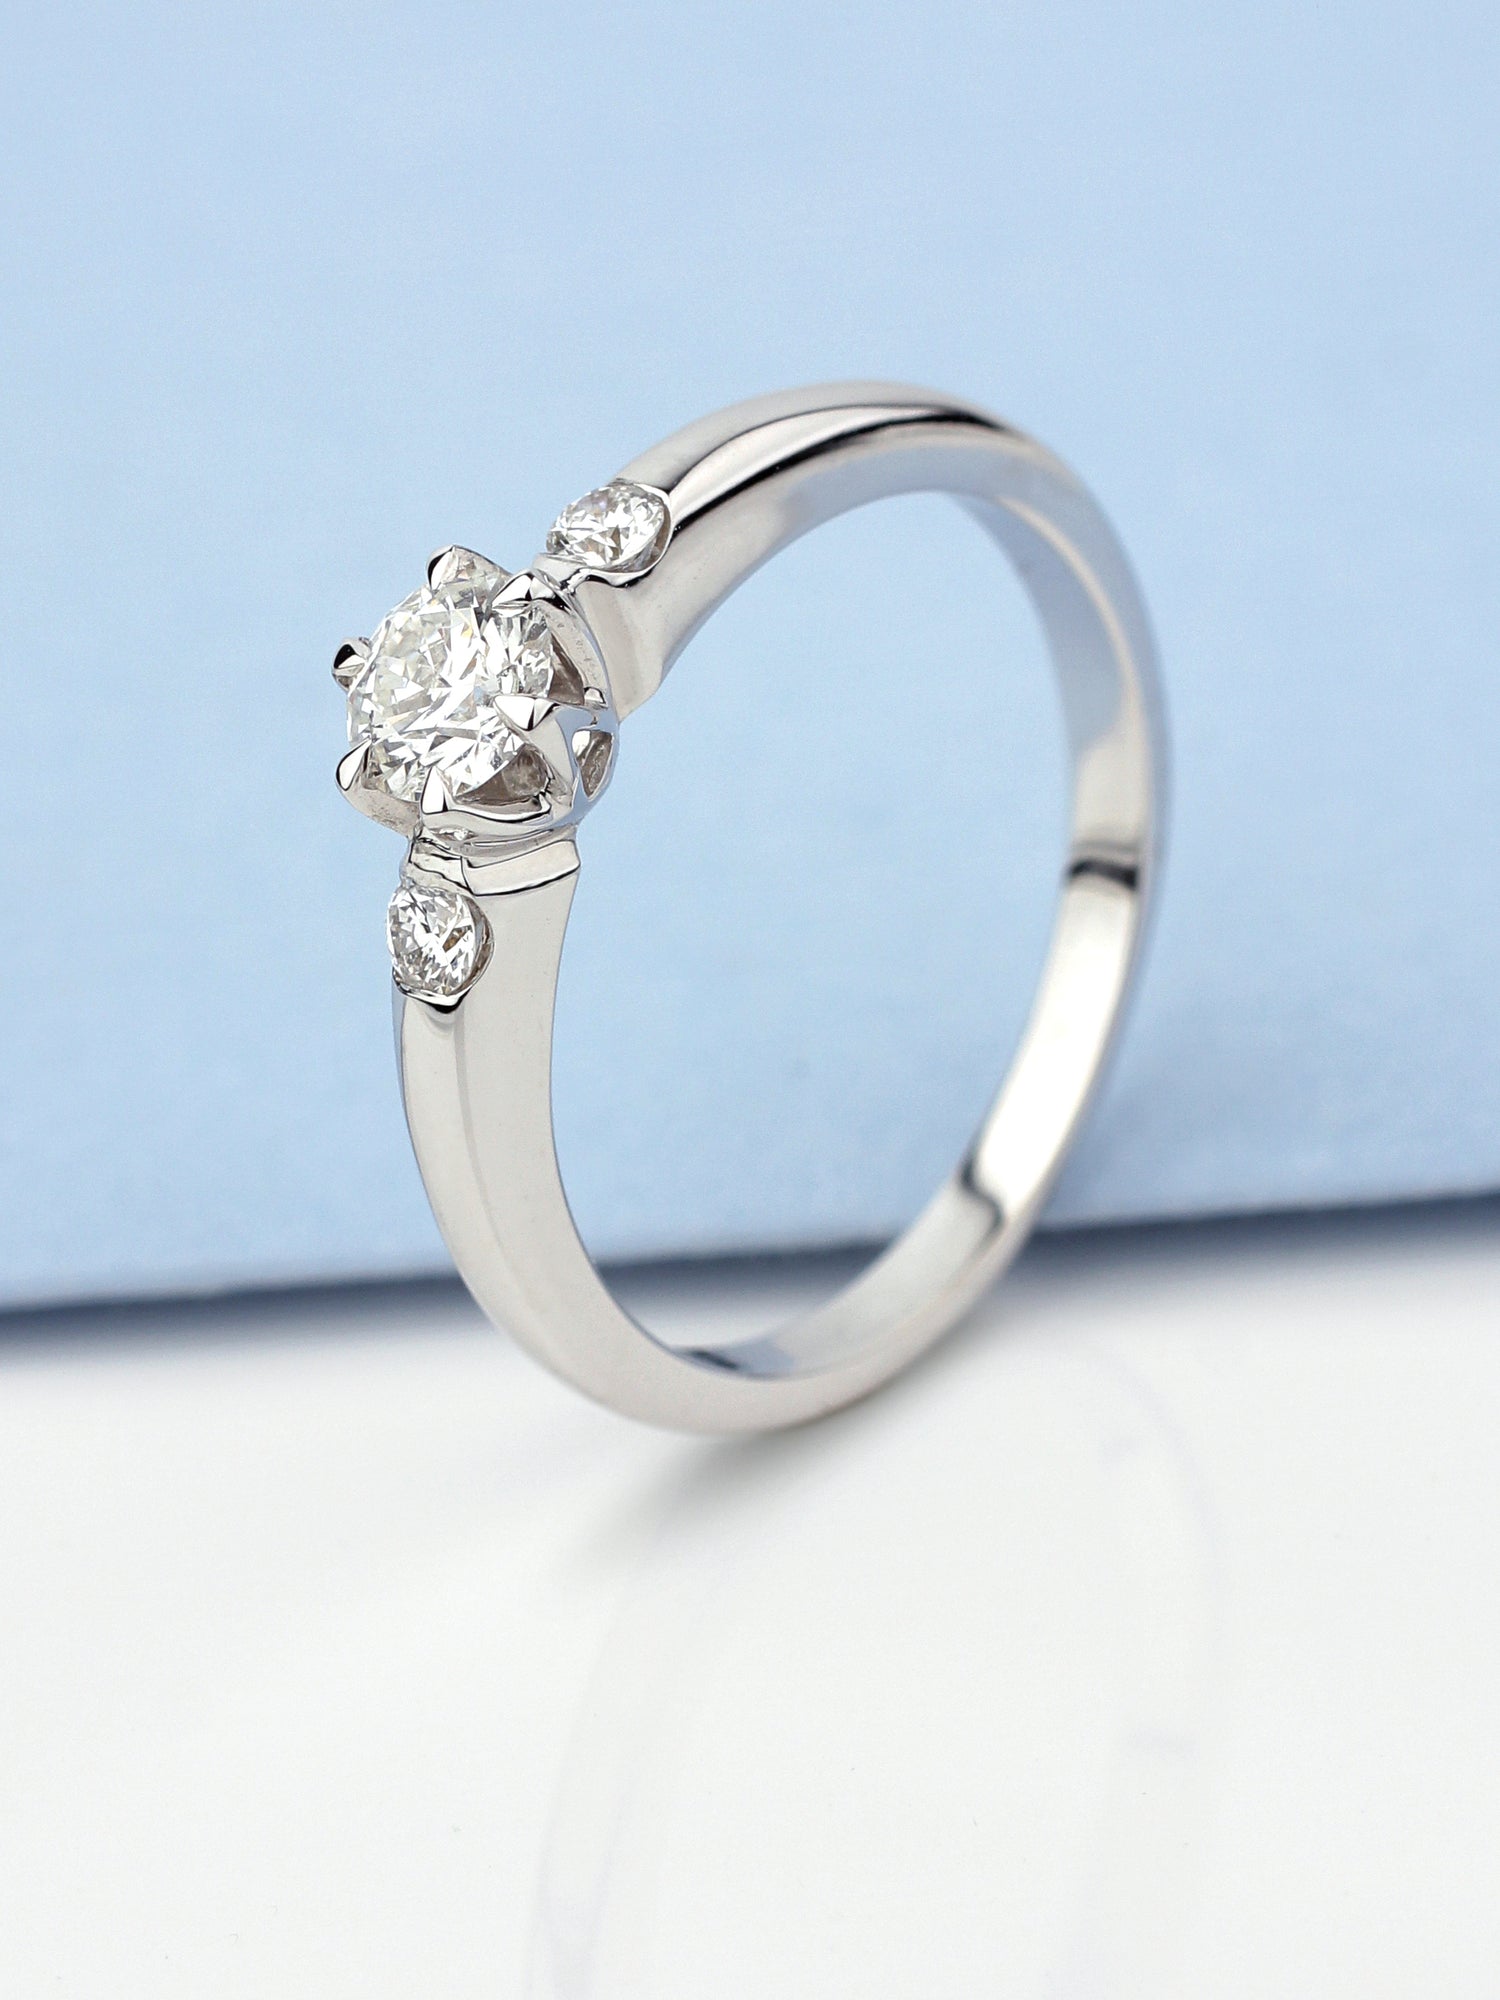 Engagement rings with diamonds and other precious stones